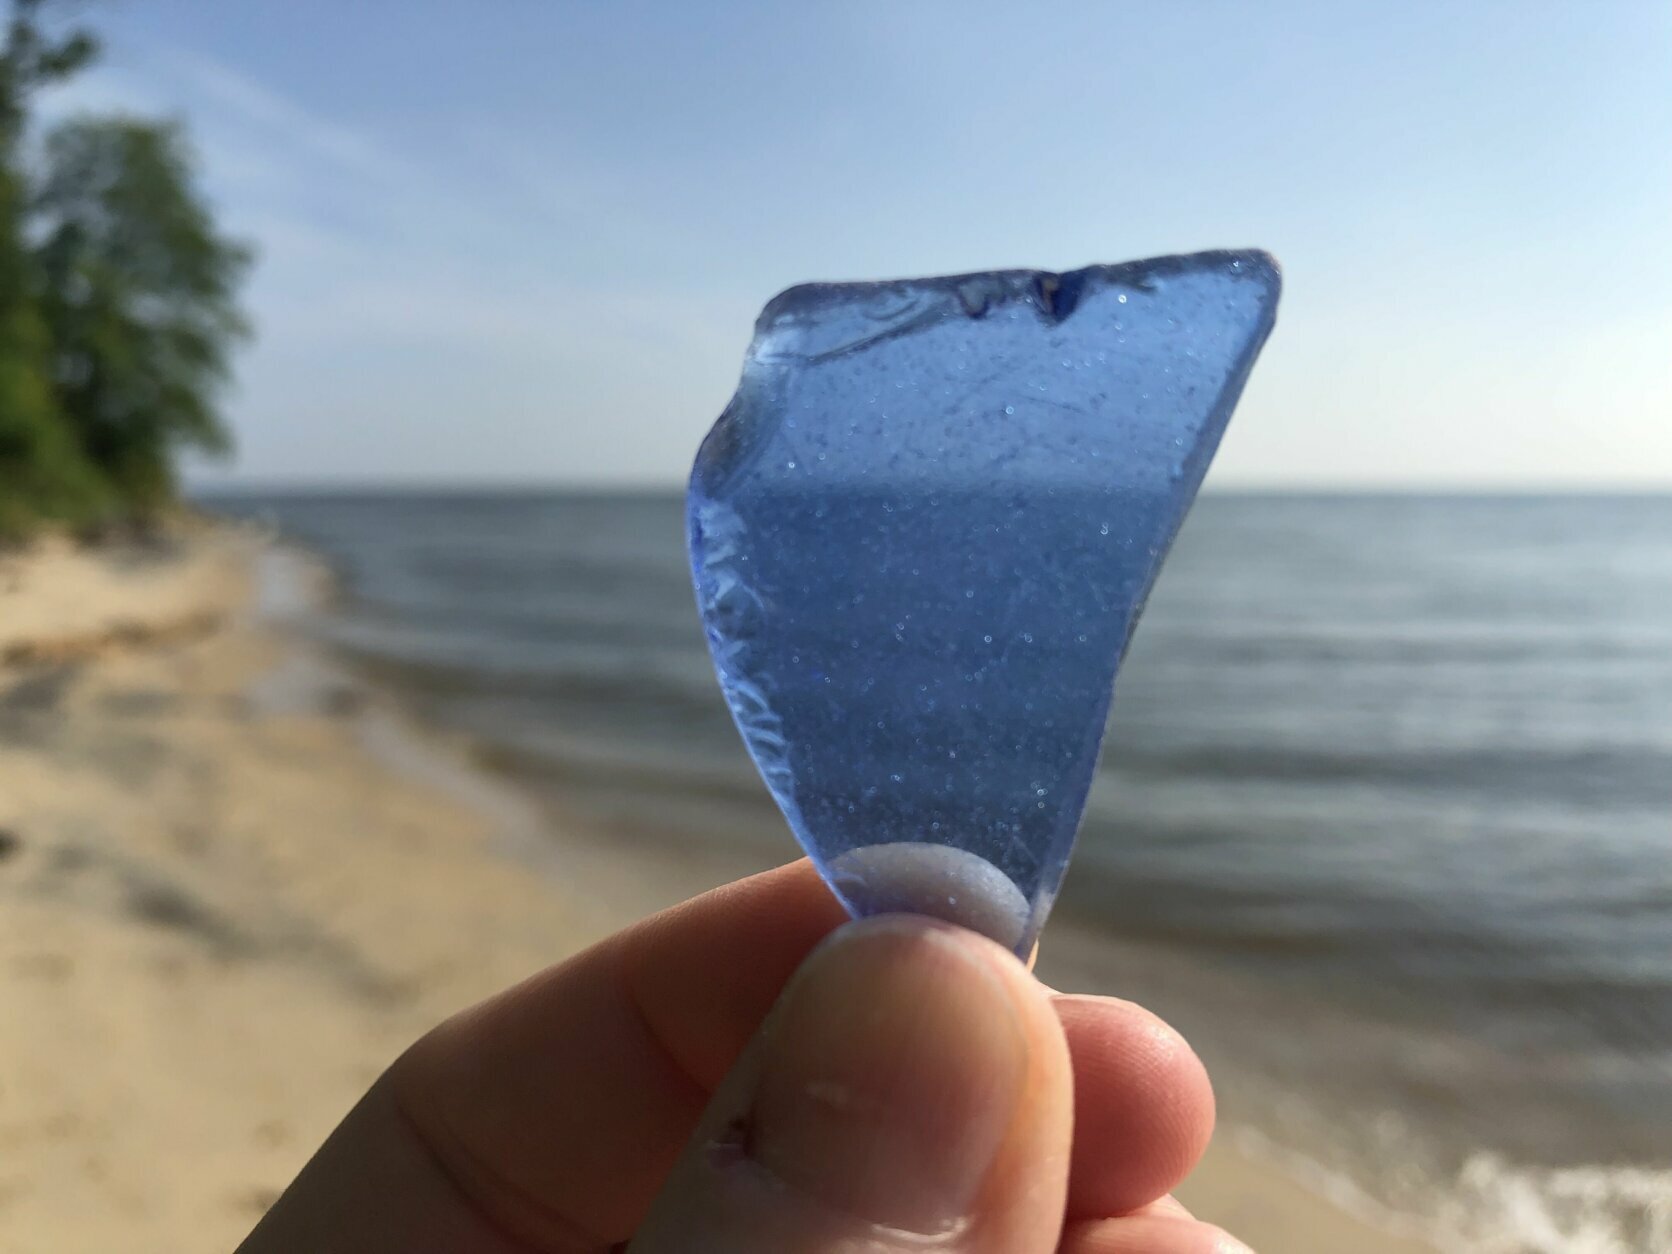 Where to find sea glass